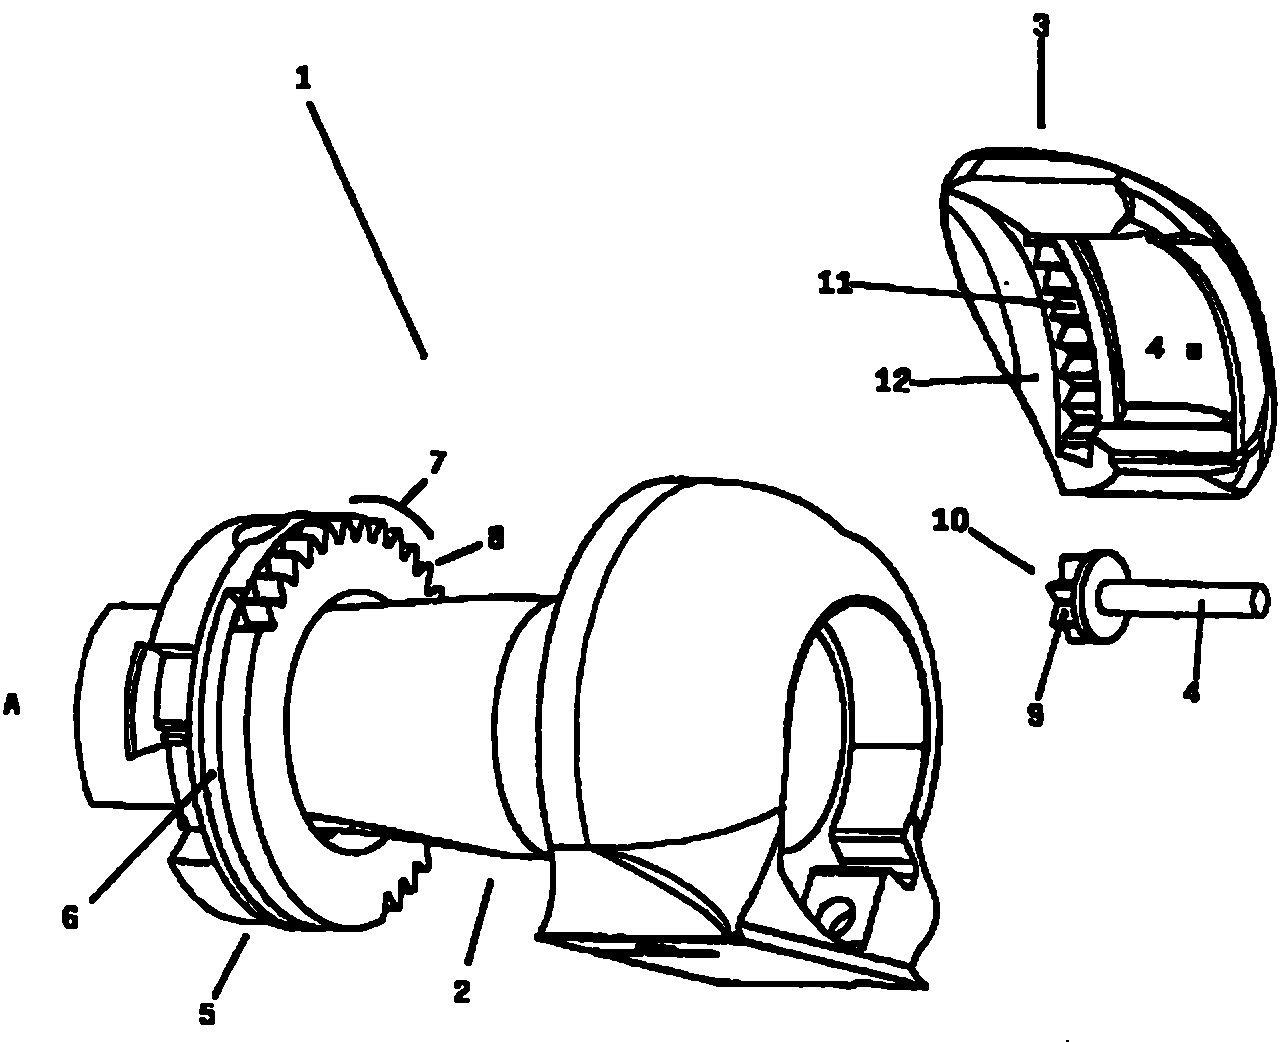 Speed changer, especially shifting device for bicycle driving device